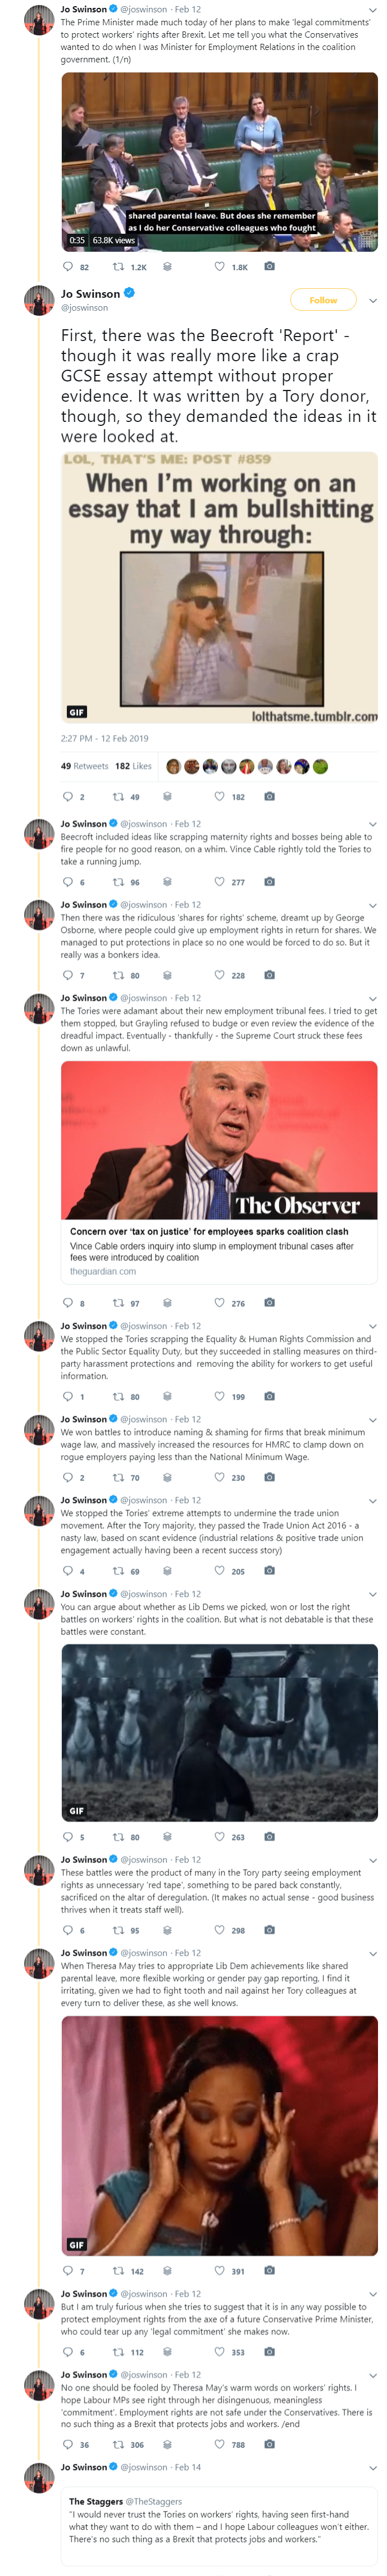 Jo Swinson tweets about employment rights